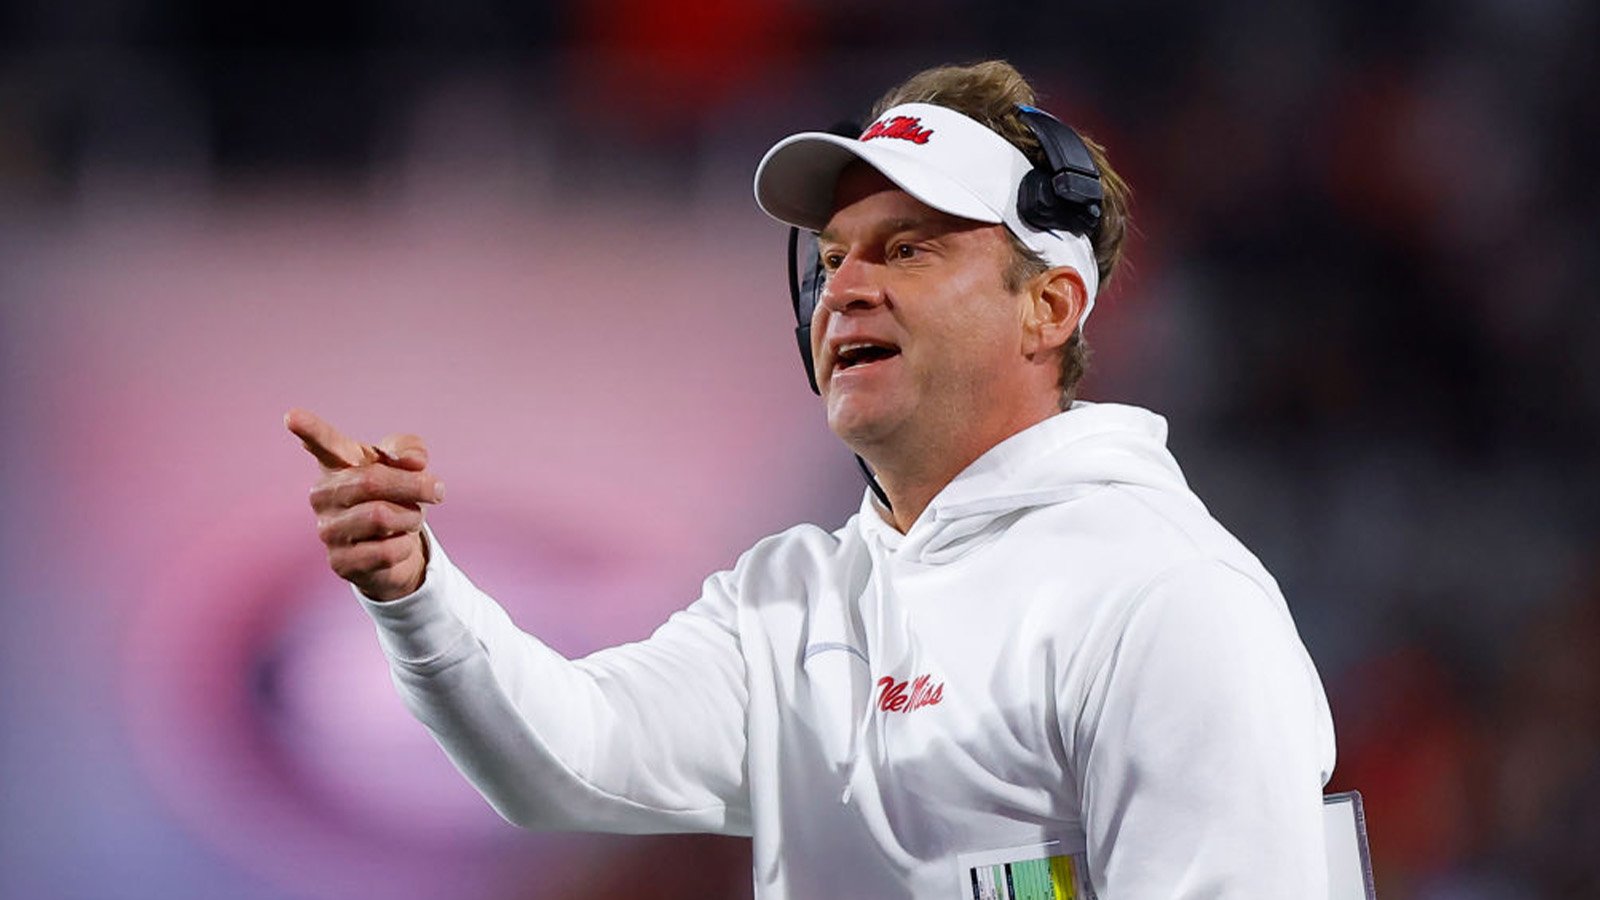 Lane Kiffin Goes Ballistic On His Own Player For Throwing Punch During Angry Sideline Tirade